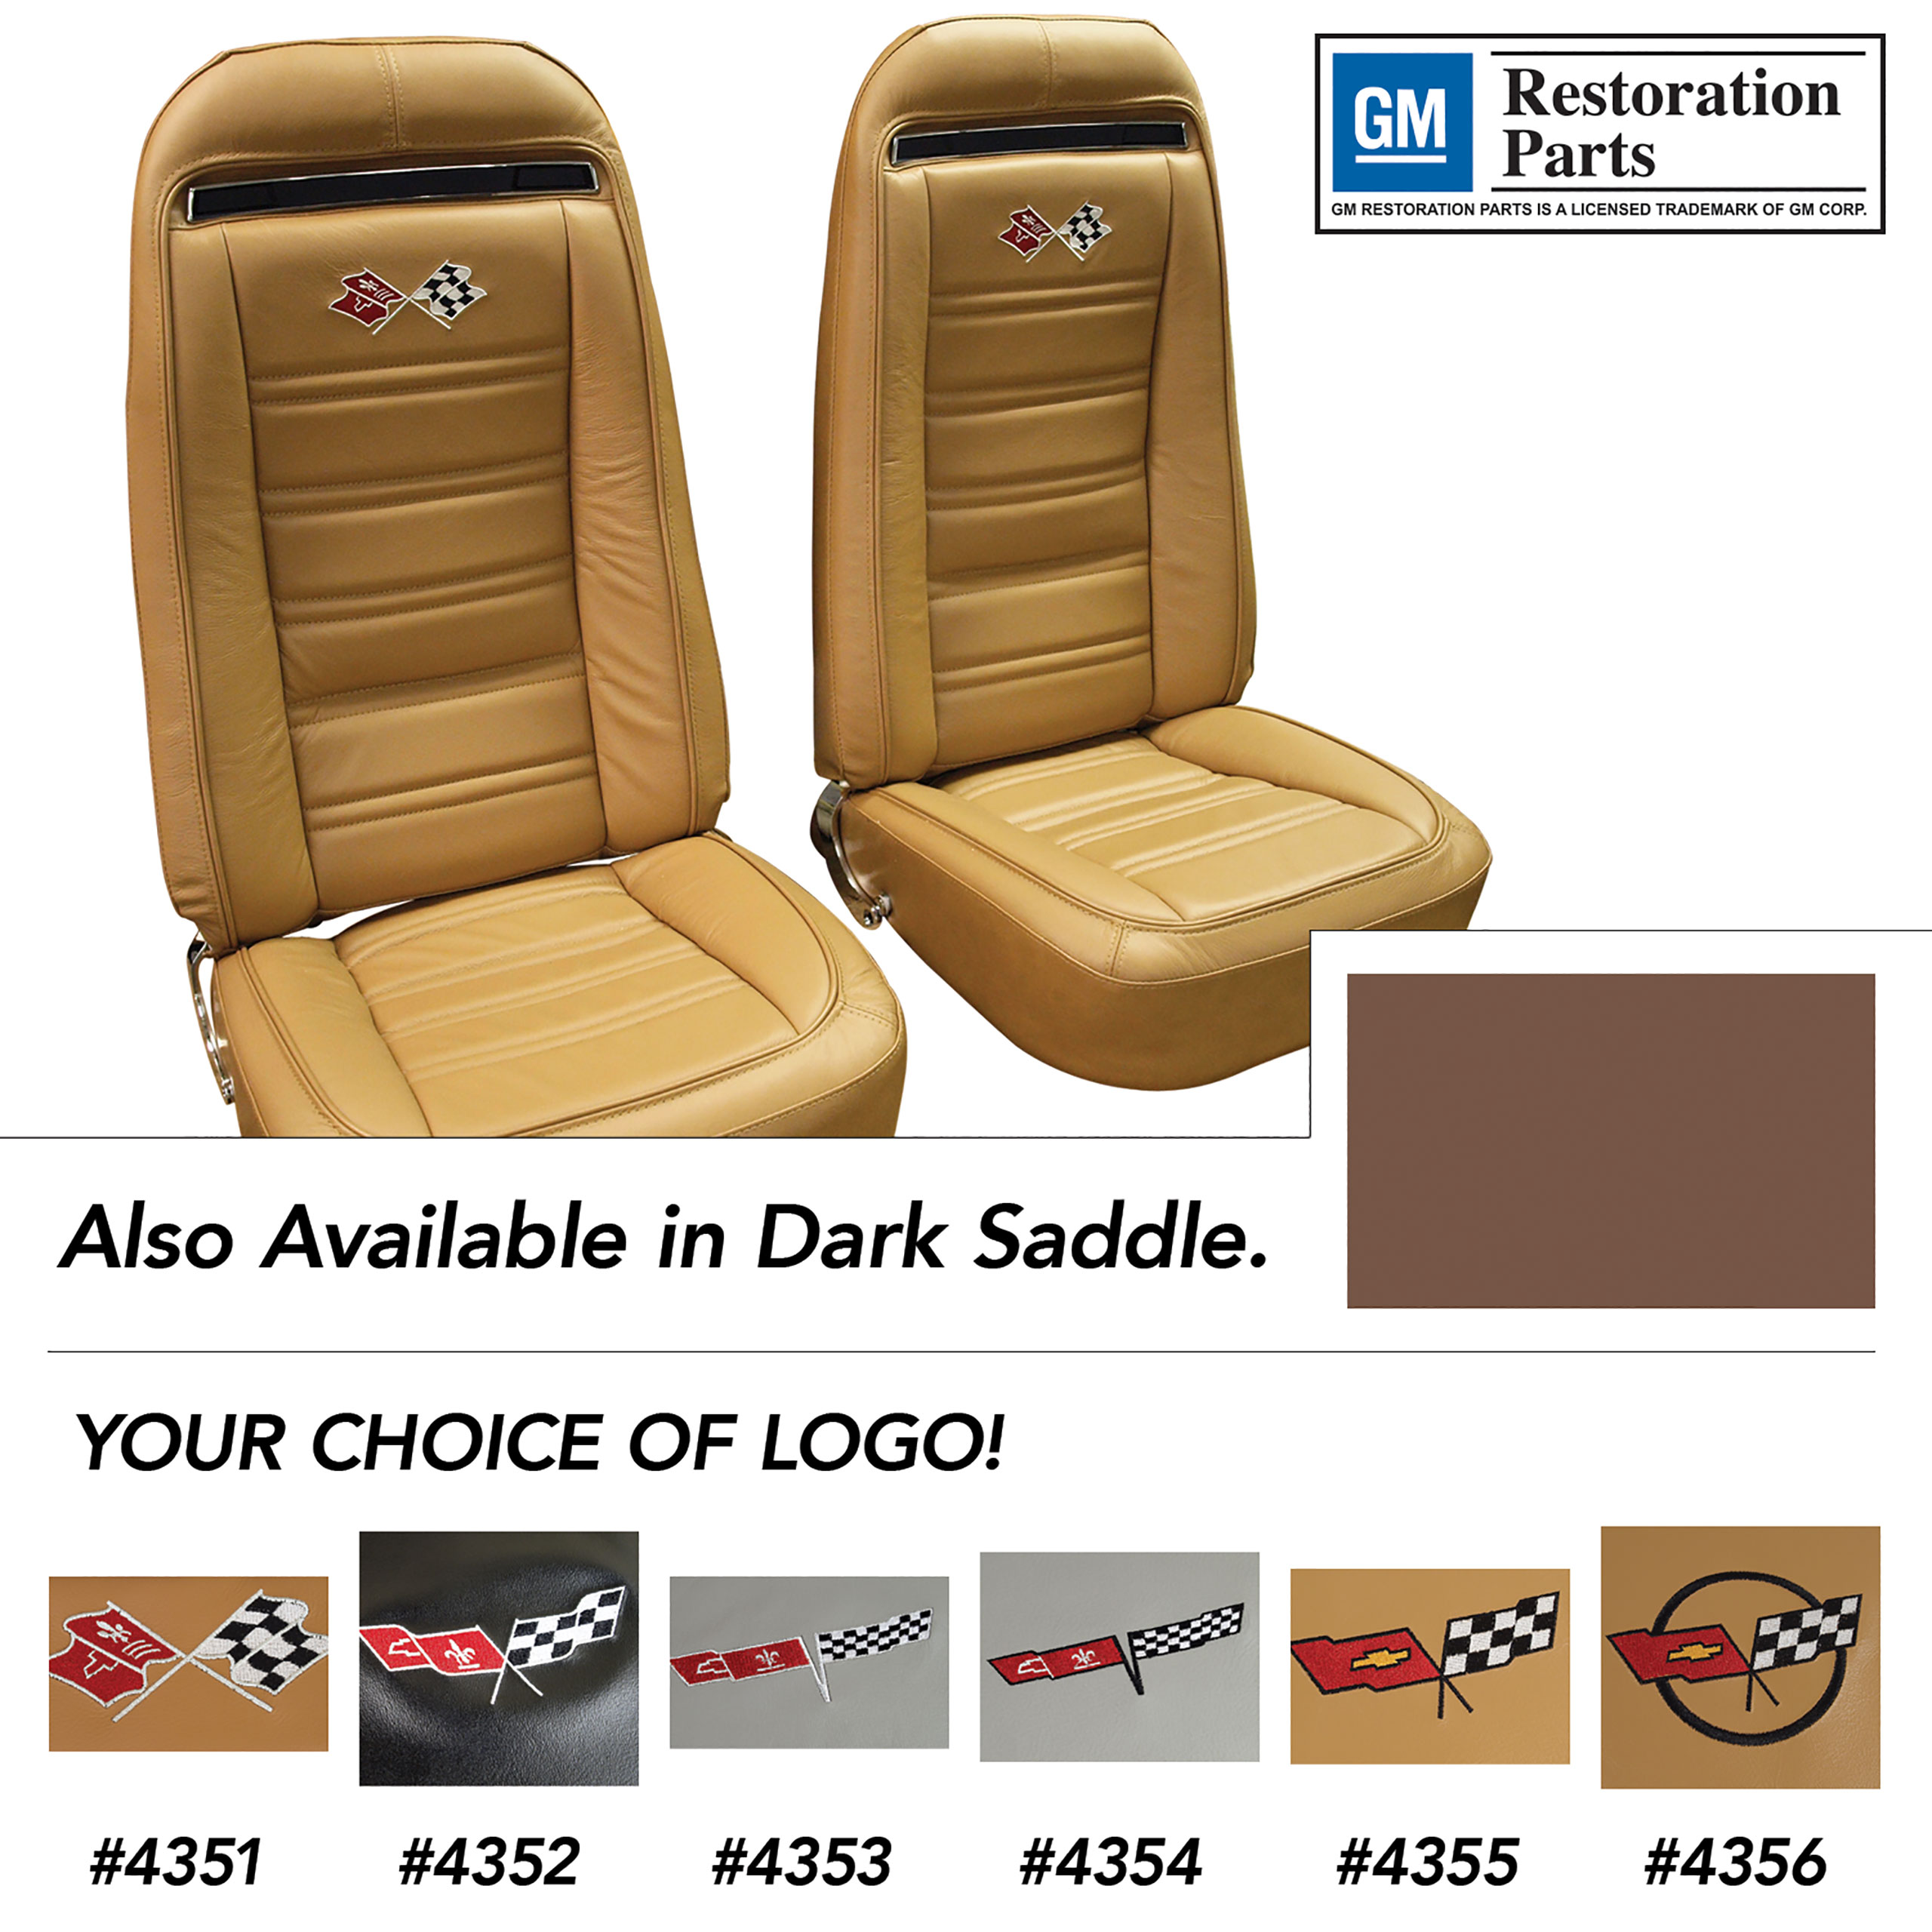 C3 1972-1974 CORVETTE OE STYLE LEATHER/VINYL EMBROIDERED SEAT COVER SET